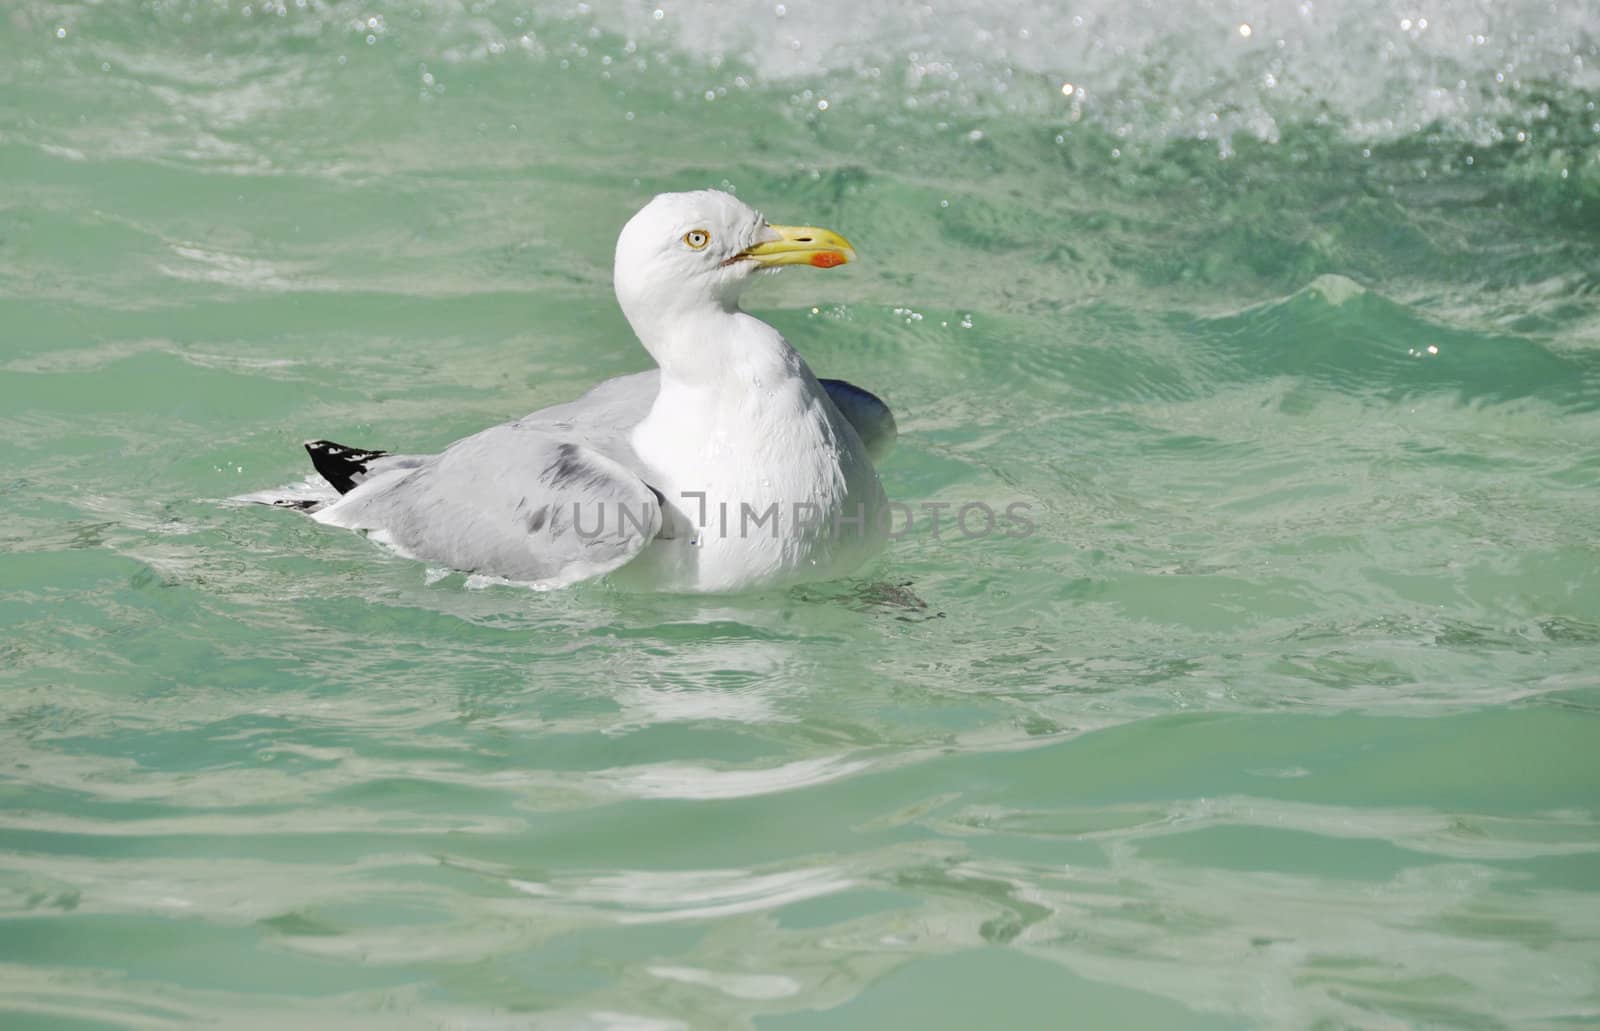 A seagull swimming on clear water